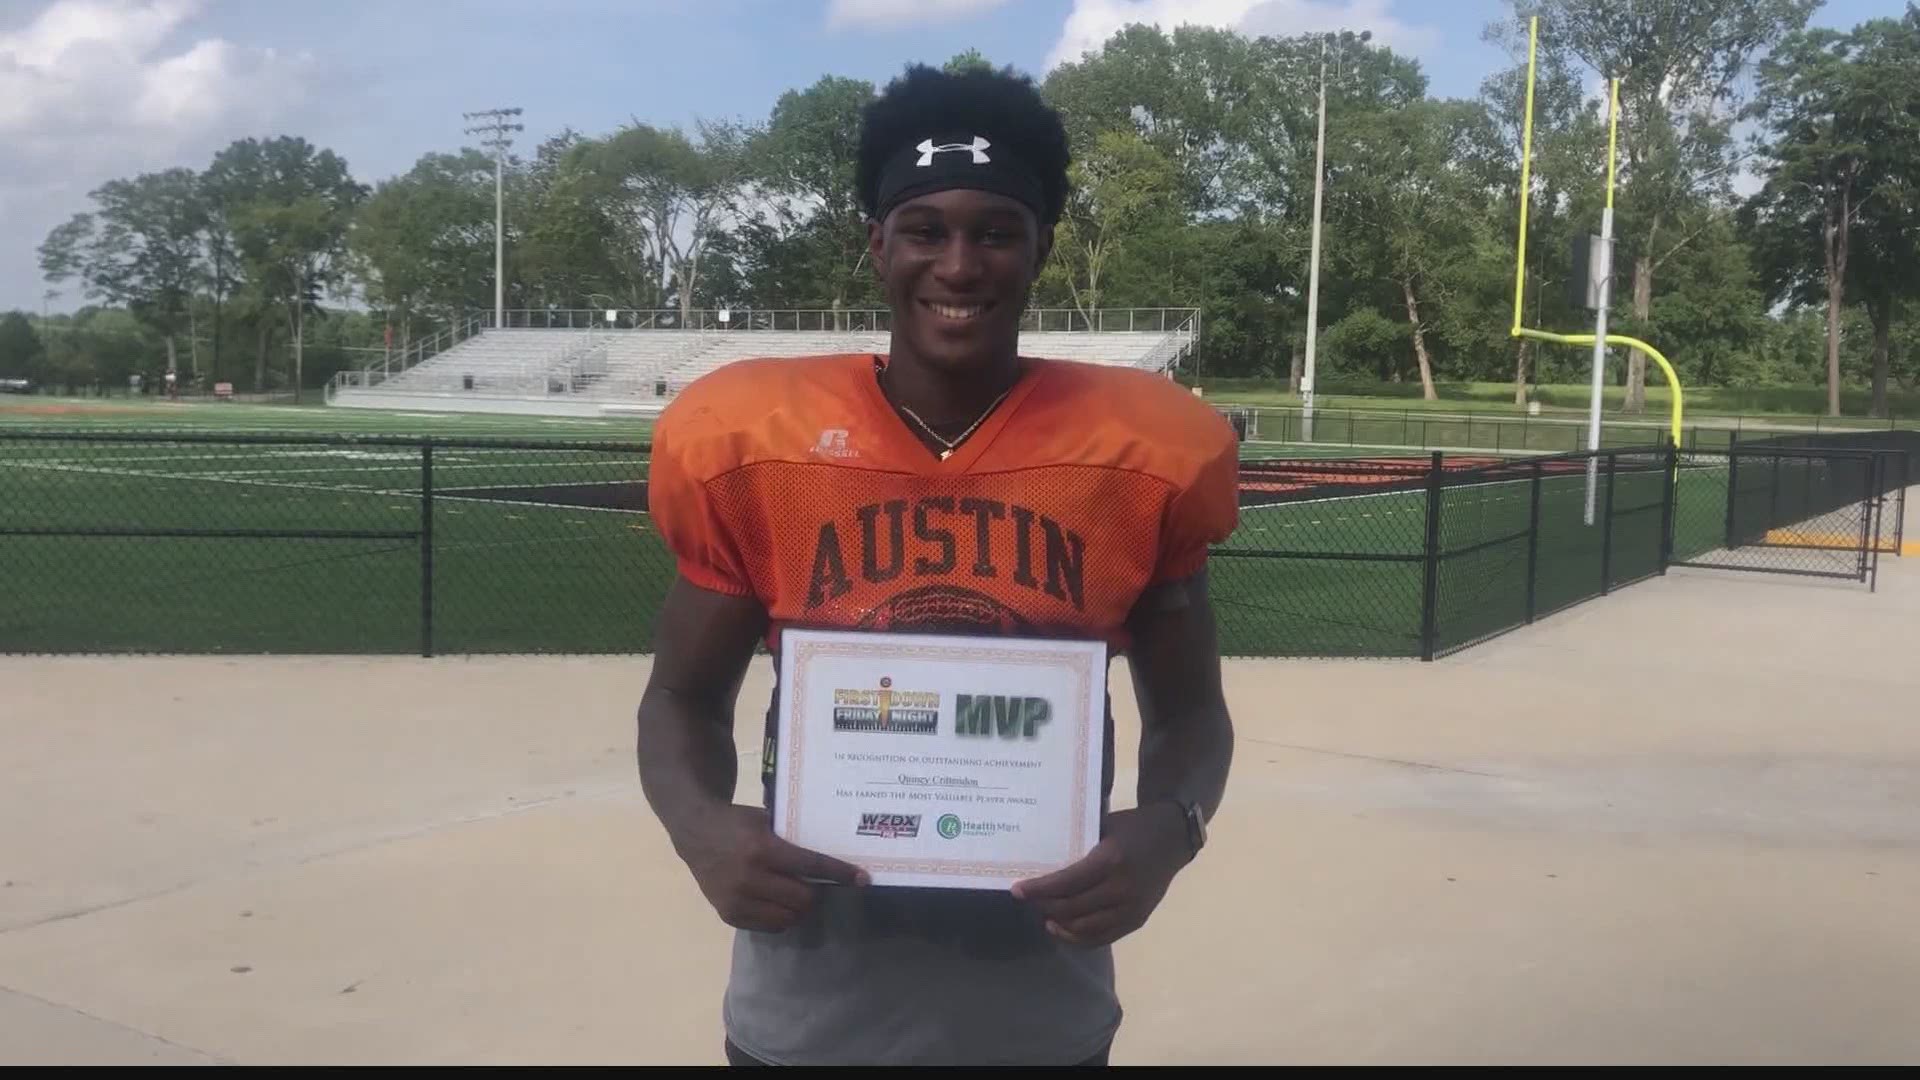 Austin High School QB Quincy Crittendon threw for passed for 236 yards & 3 touchdowns against Decatur. For his efforts, Cittendon has been named our Week 1 FDFN MVP